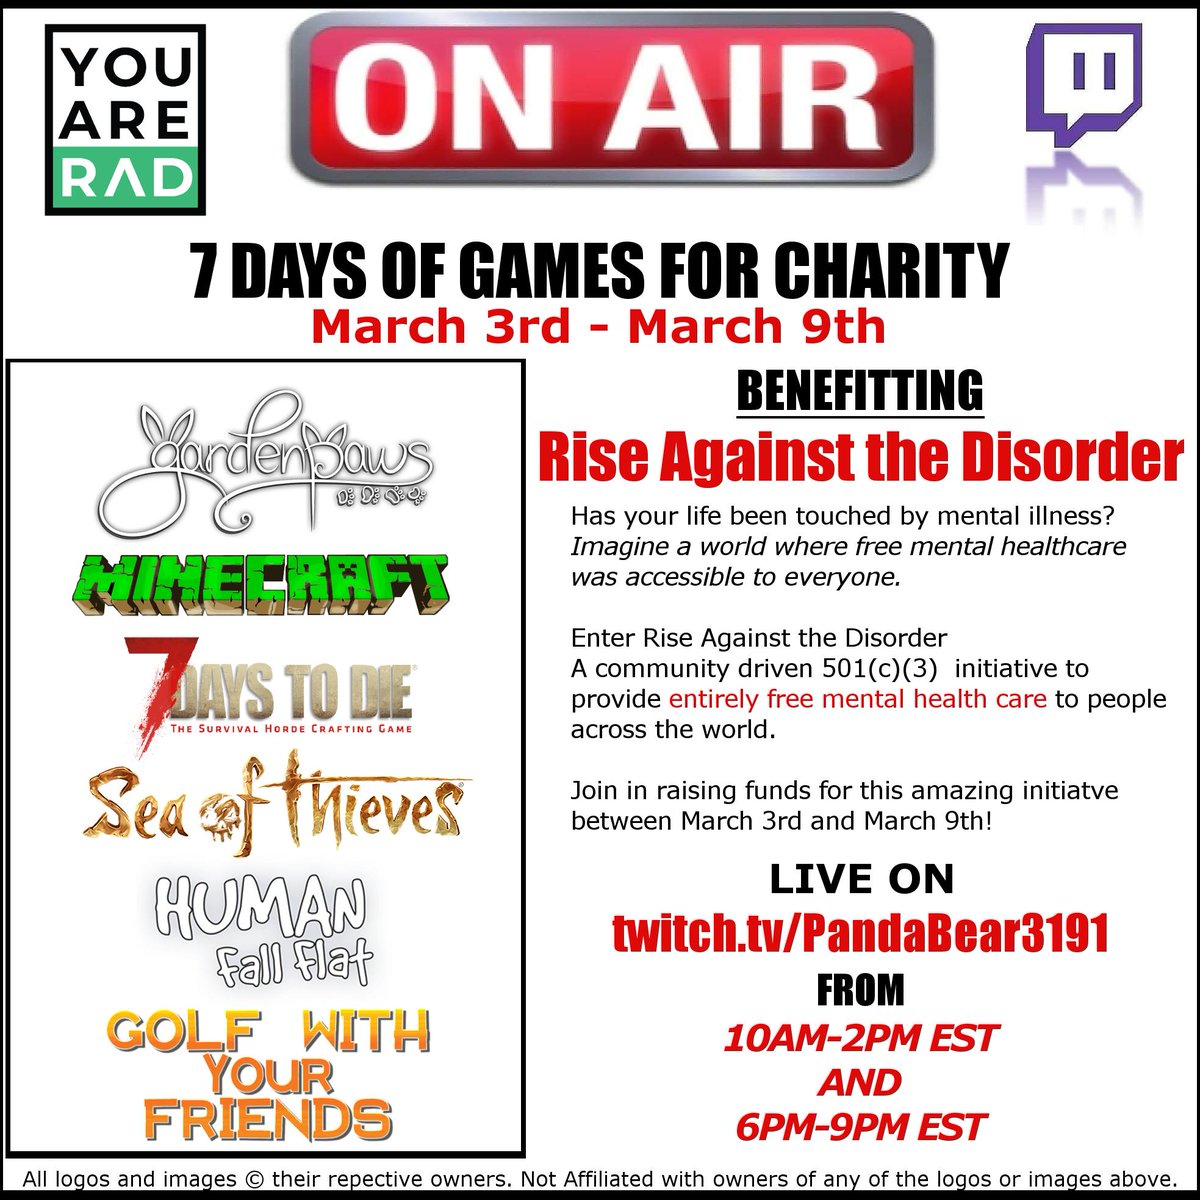 This is good stuff, join in! #PandaBabesAreRAD #SupportSmallStreamers #CharityStreams